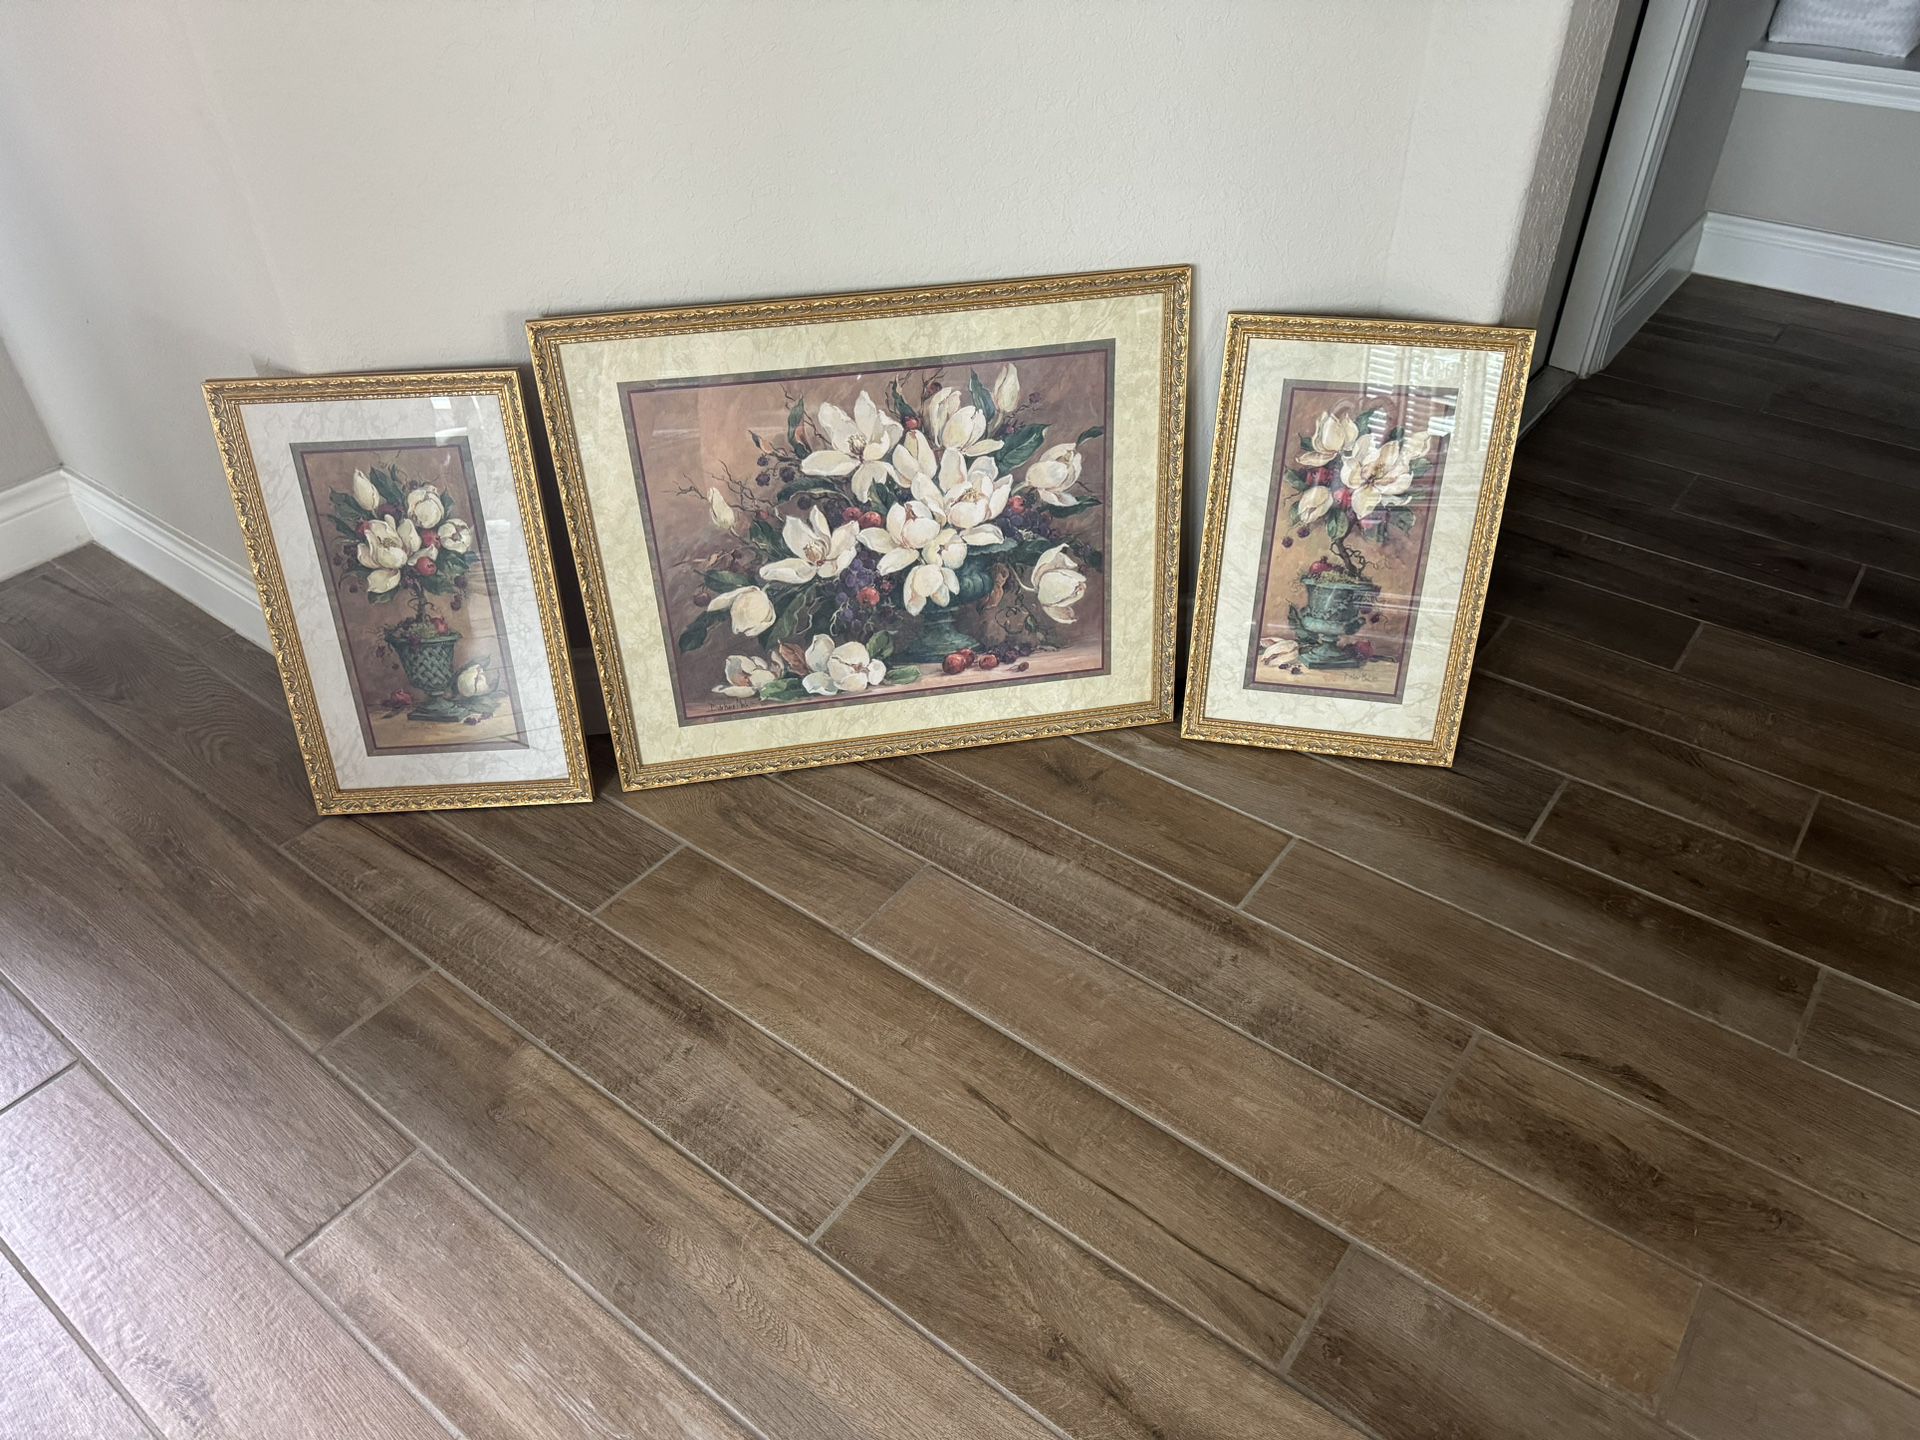 Trio of Floral Pictures 